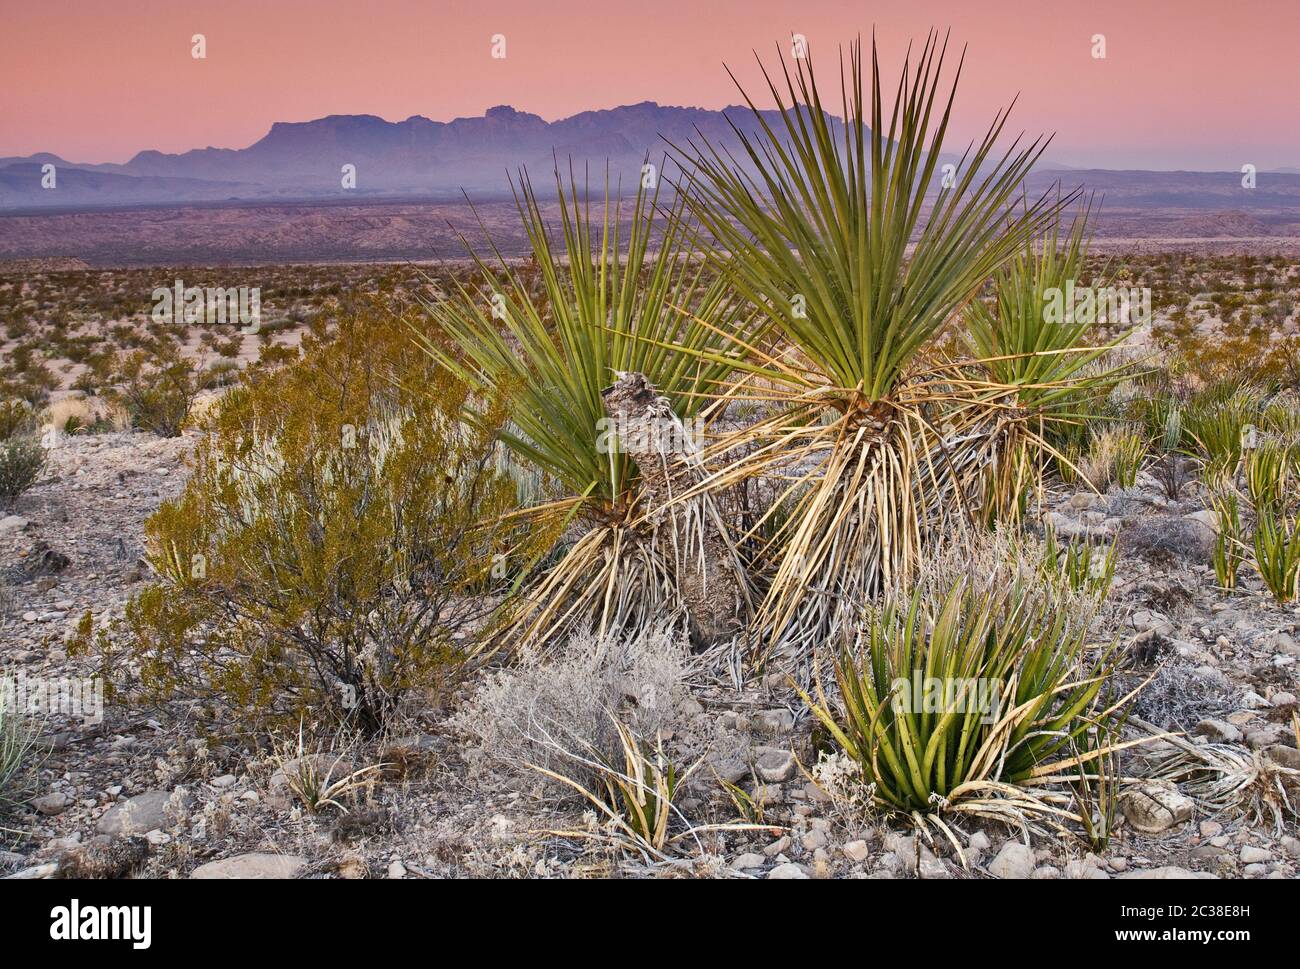 Chisos Mountains at sunrise, yuccas, lechuguilla agaves and creosote bushes, Old Ore Road at Chihuahuan Desert in Big Bend National Park, Texas, USA Stock Photo